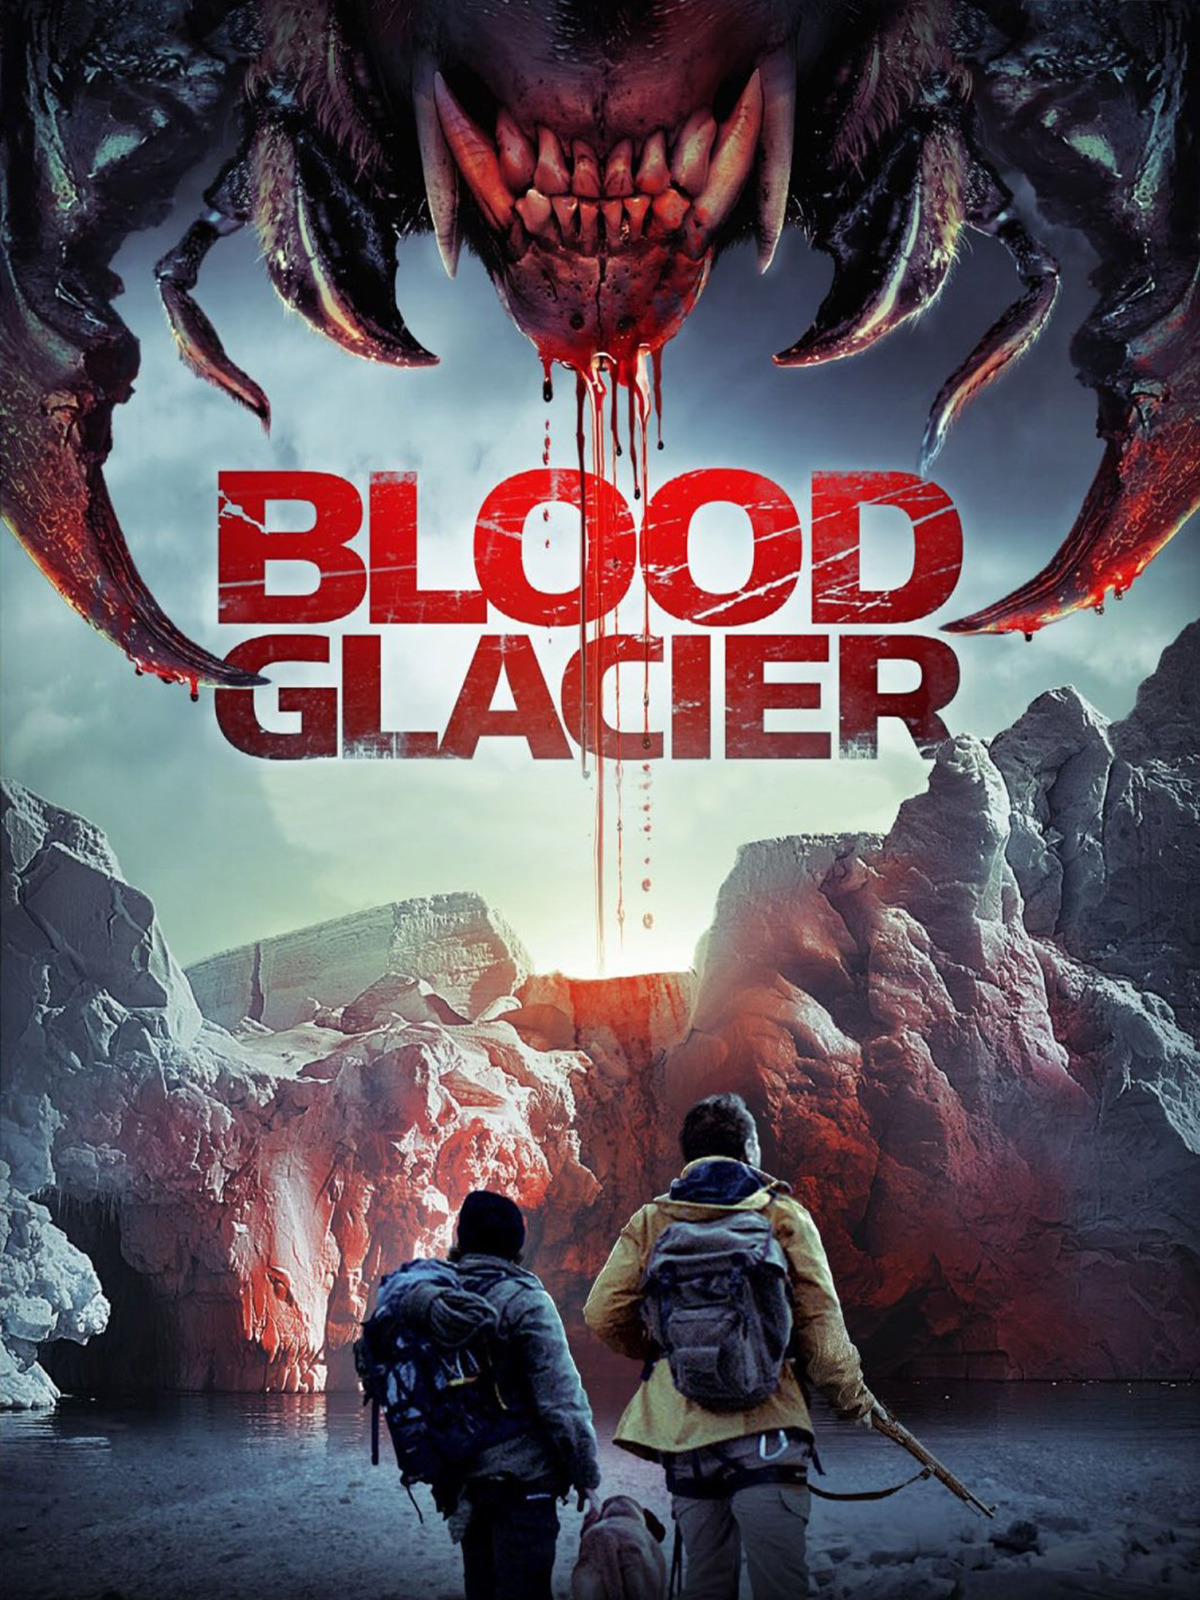 Exploring The Blood Glacier – Released in 2013 